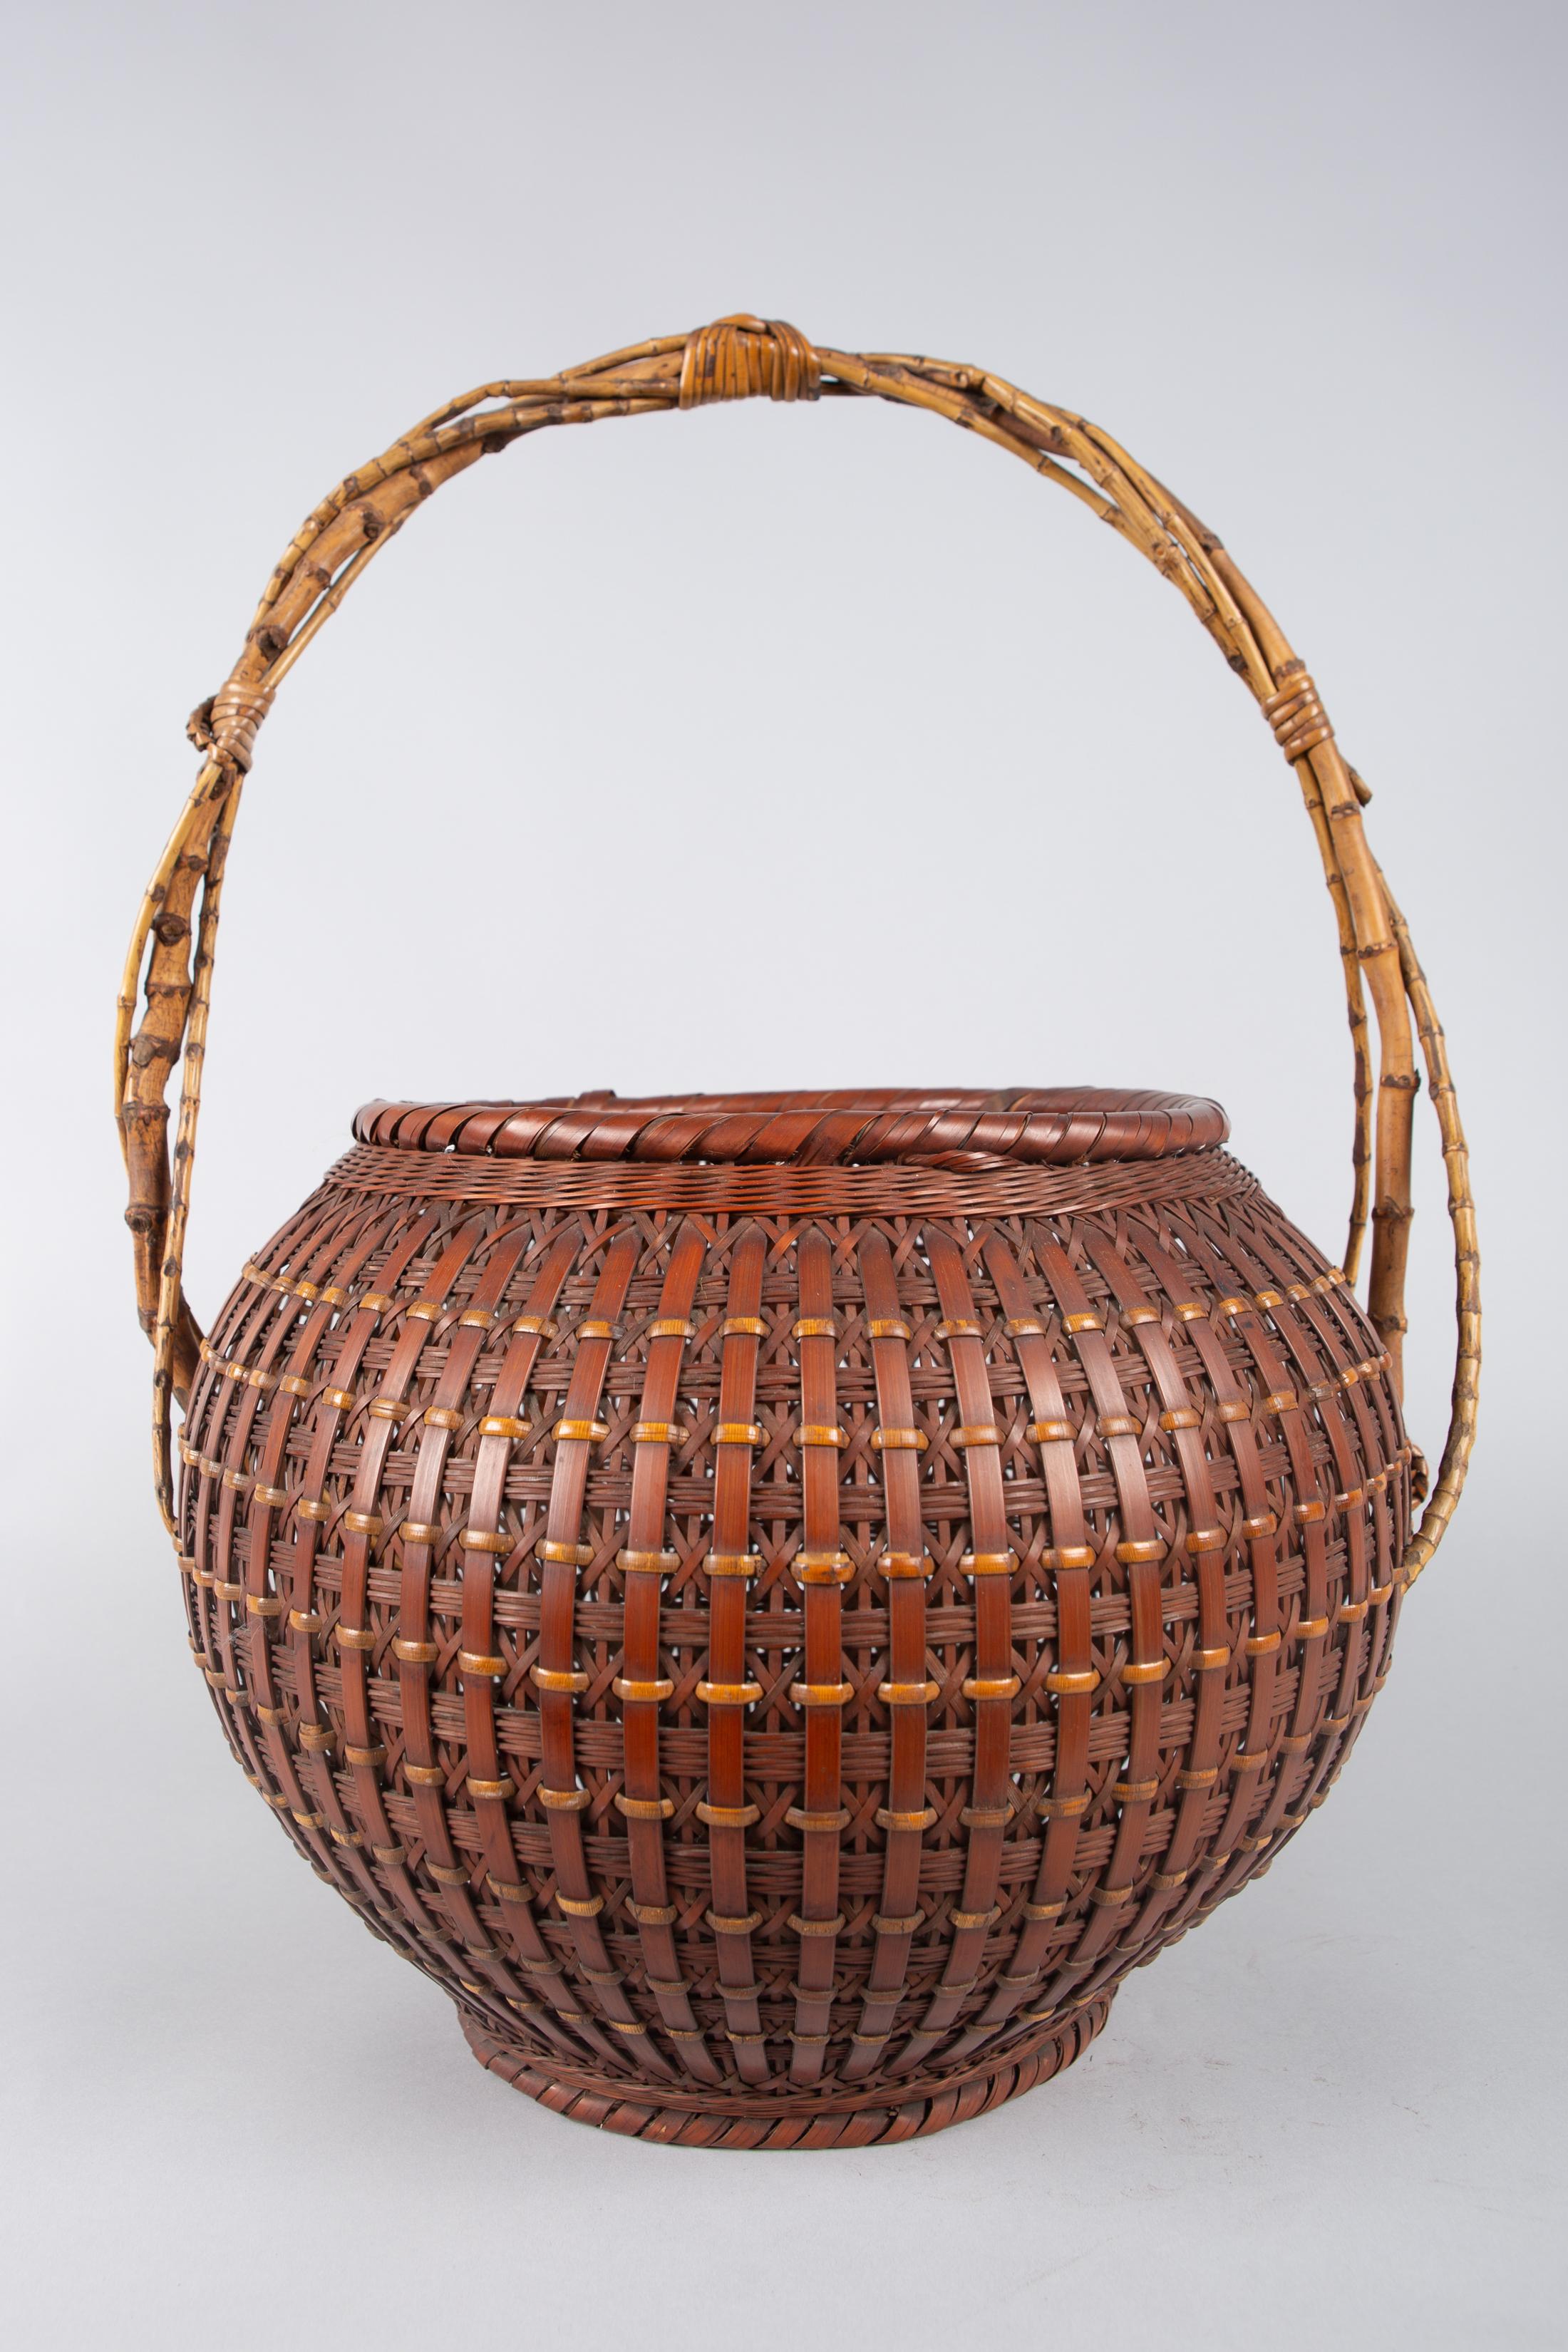 Japanese Ikebana (Flower Arranging Basket), Signed by Teijo Sai (the artist) on the bottom.
Meiji Period (1868-1912) ikebana made of smoked bamboo, polished with ash. Very nice weaving. Handle made of young twisted and bound bamboo. Comes with